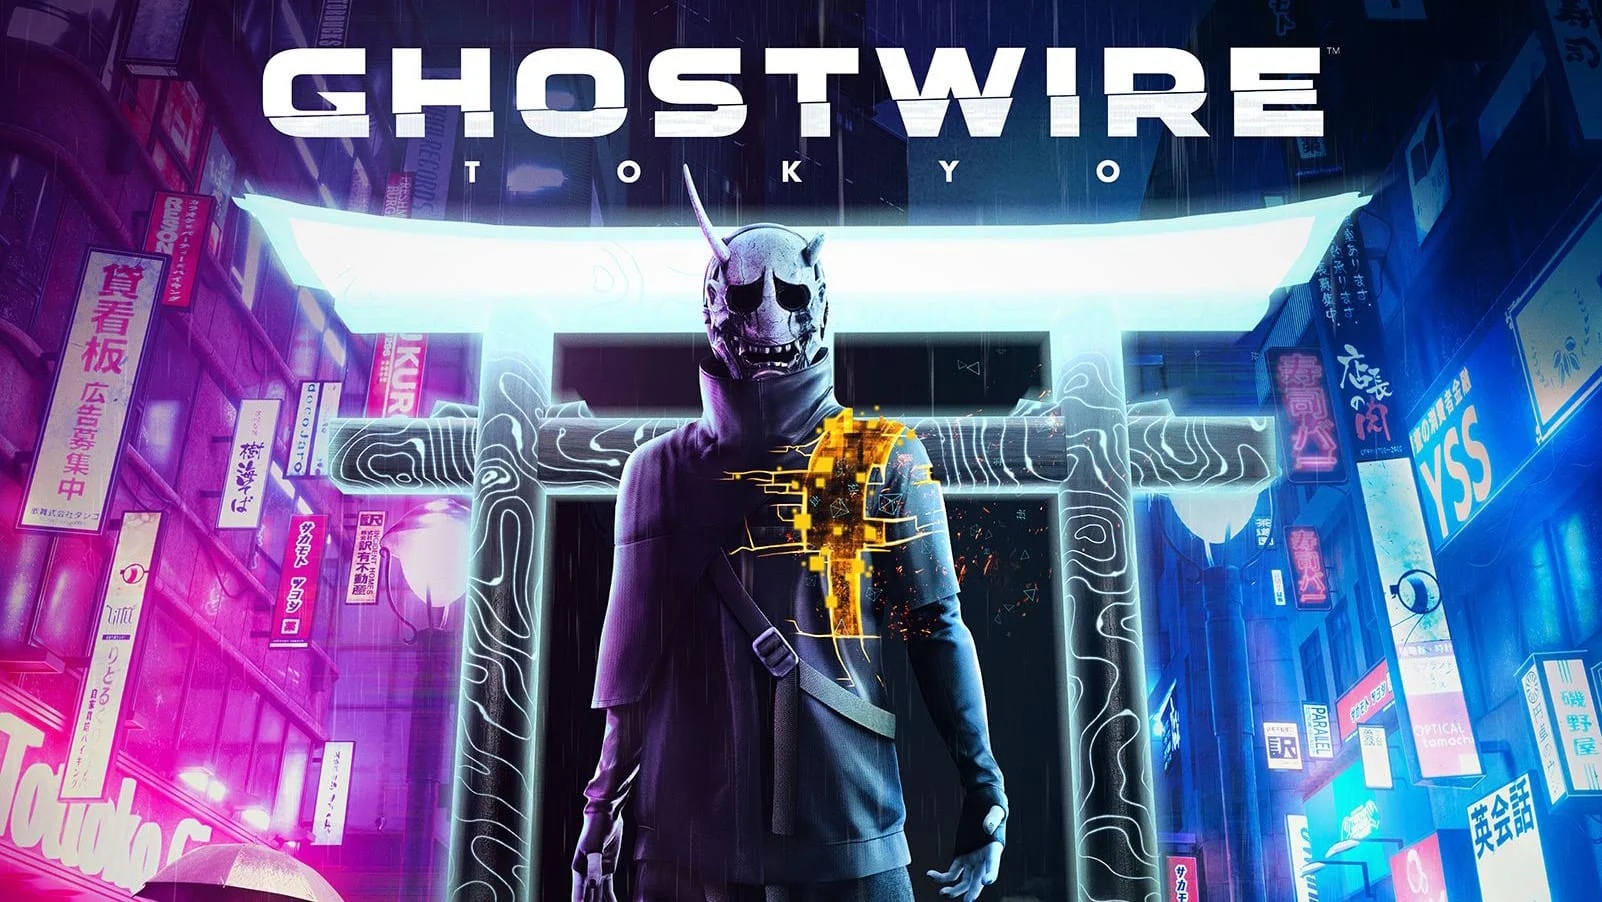 Ghostwire: Tokyo is coming April 12 to Xbox and Game Pass with a new content update